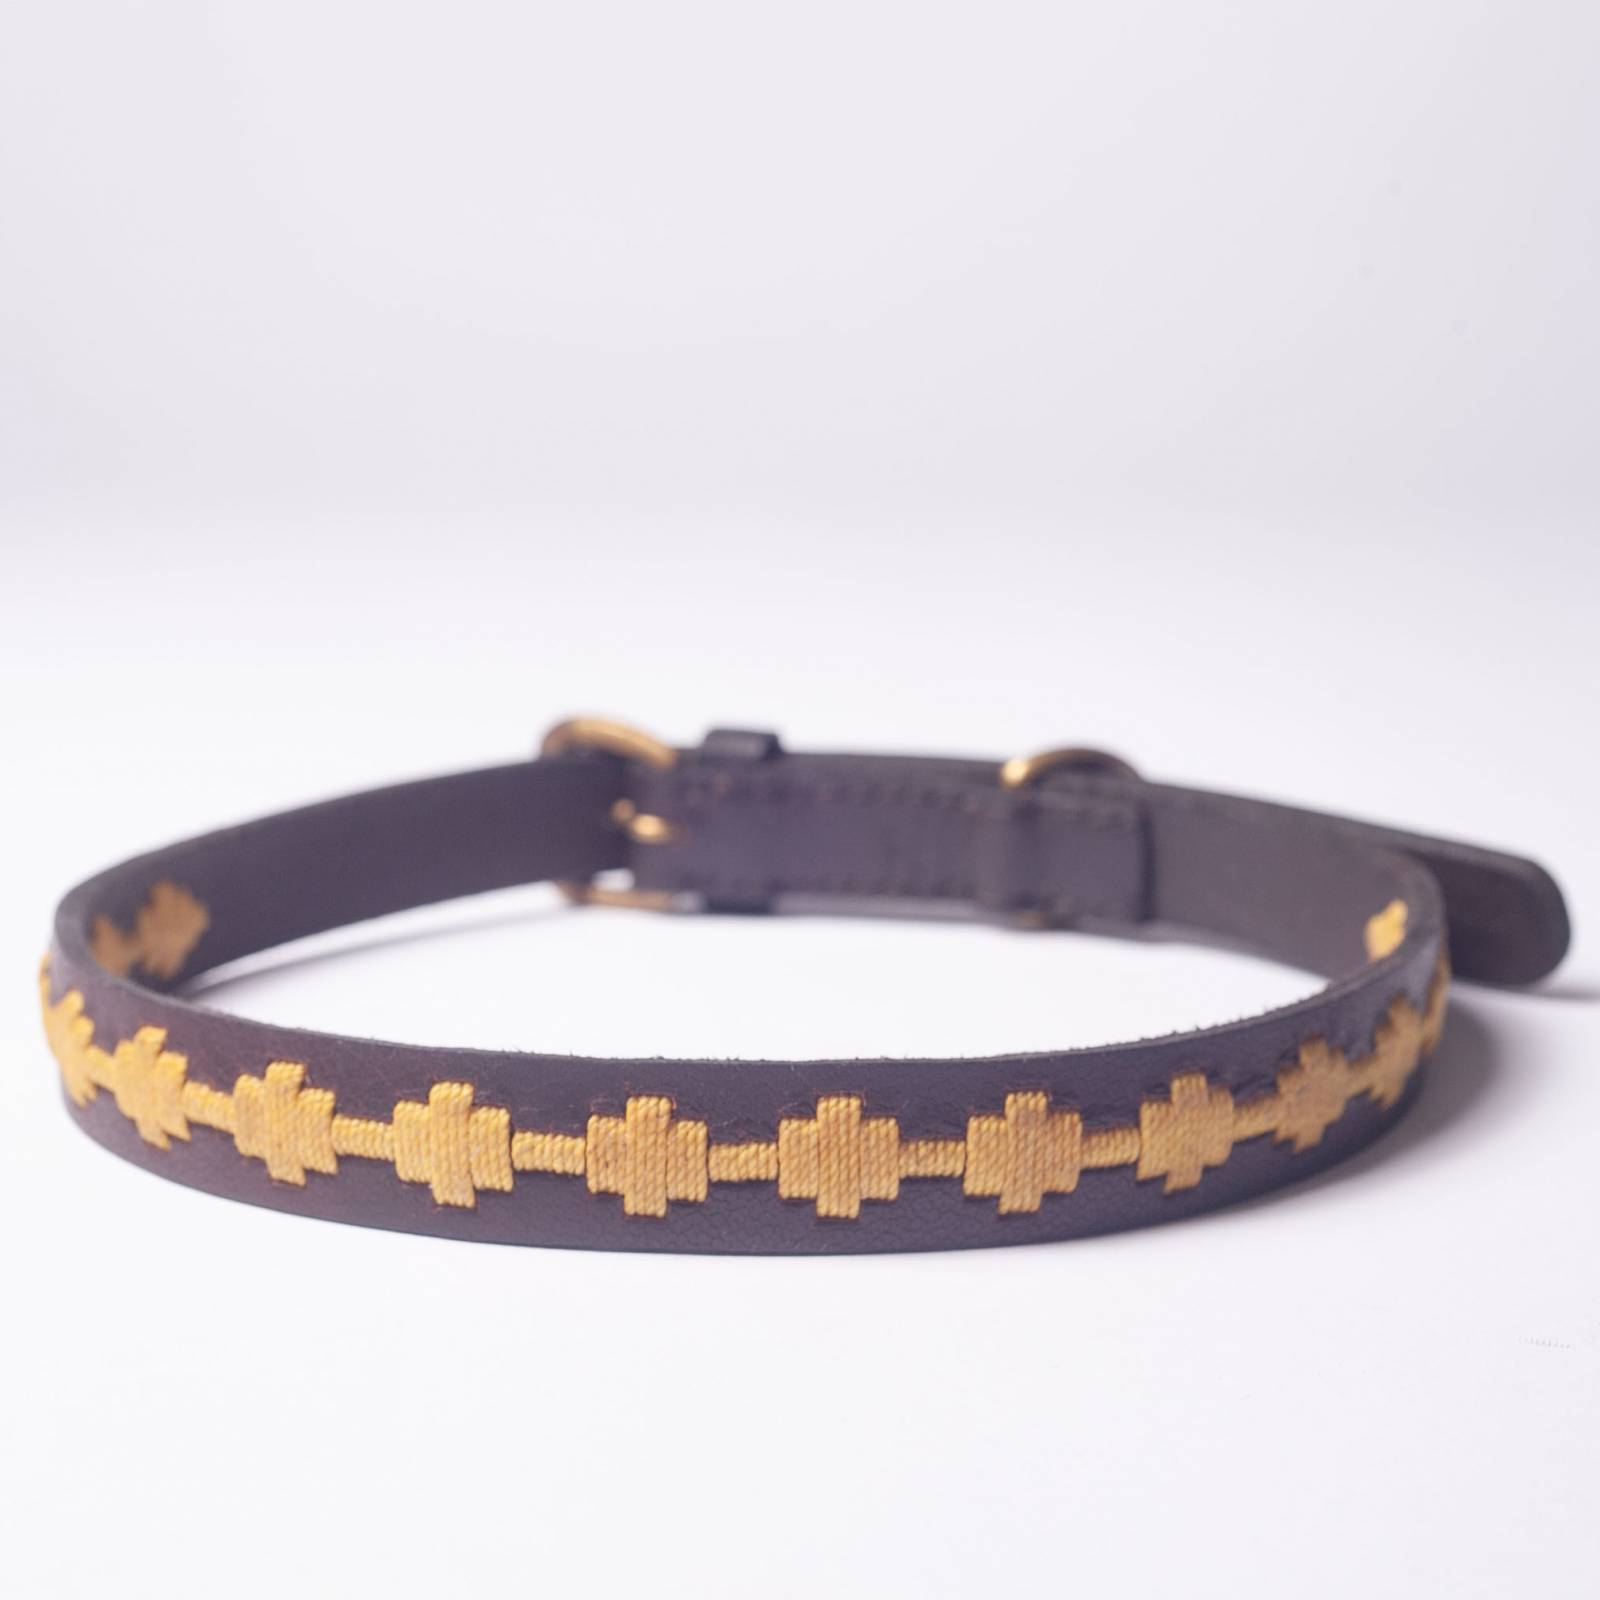 Bark Leather Dog Collar In Wheat - Extra Large thumbnails